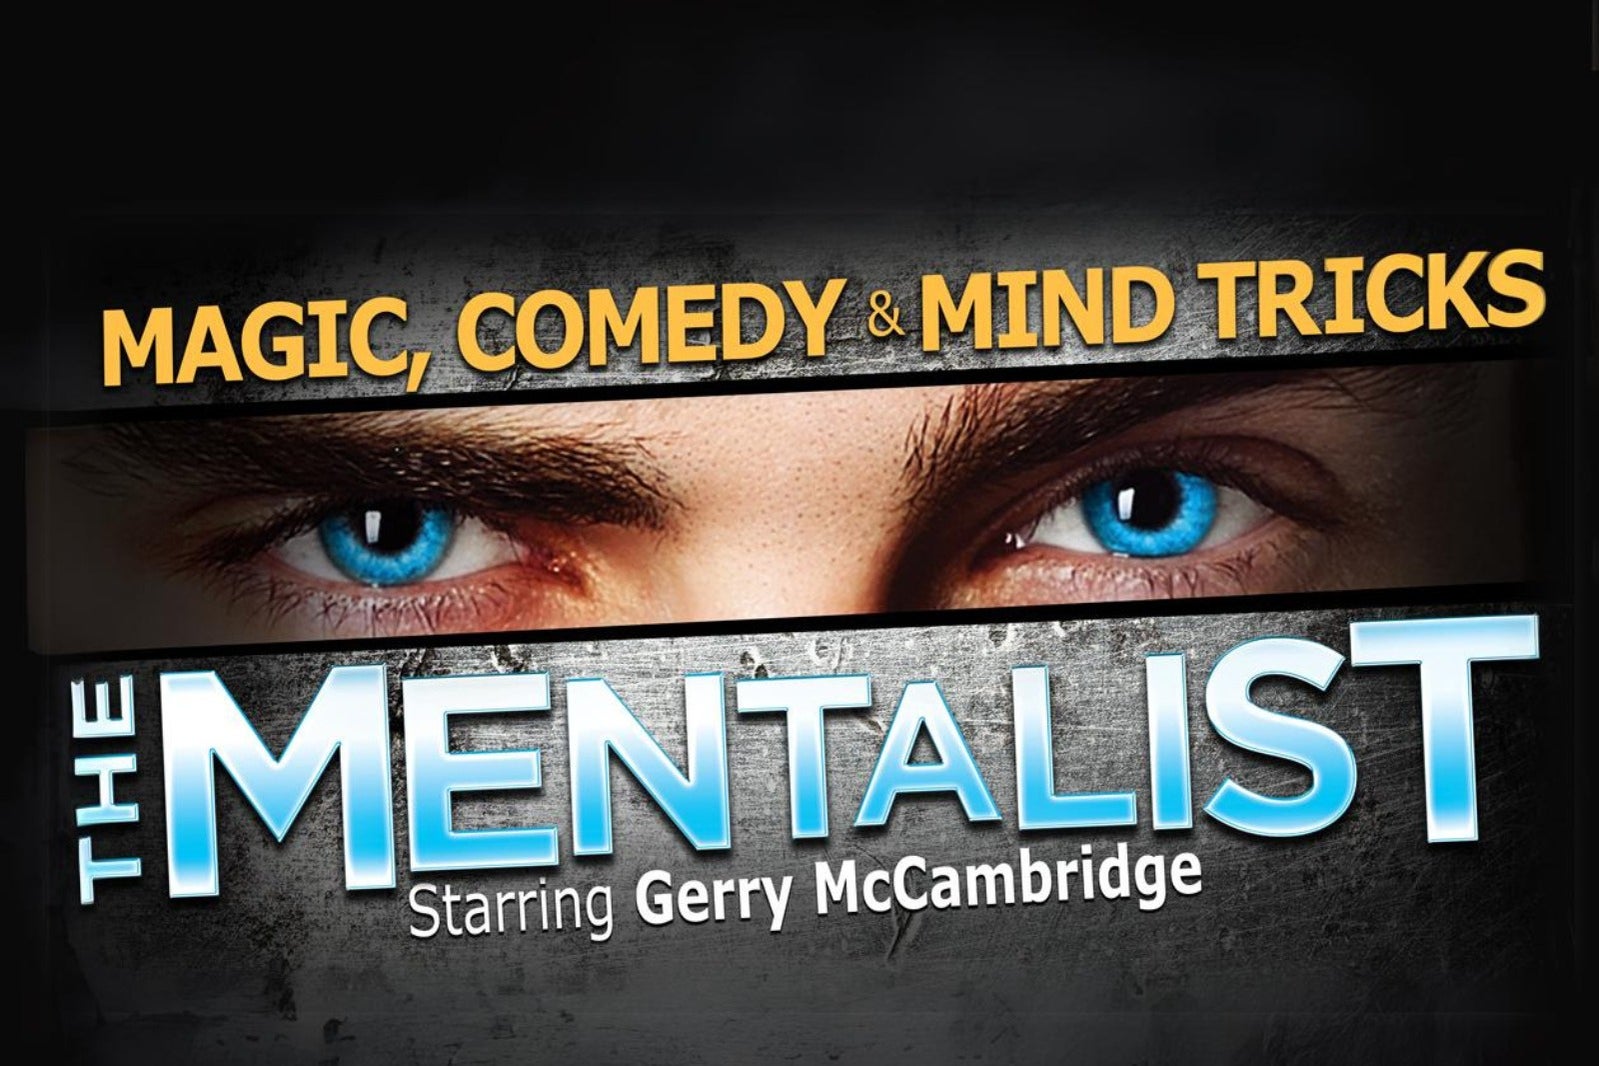 Ticket to The Mentalist